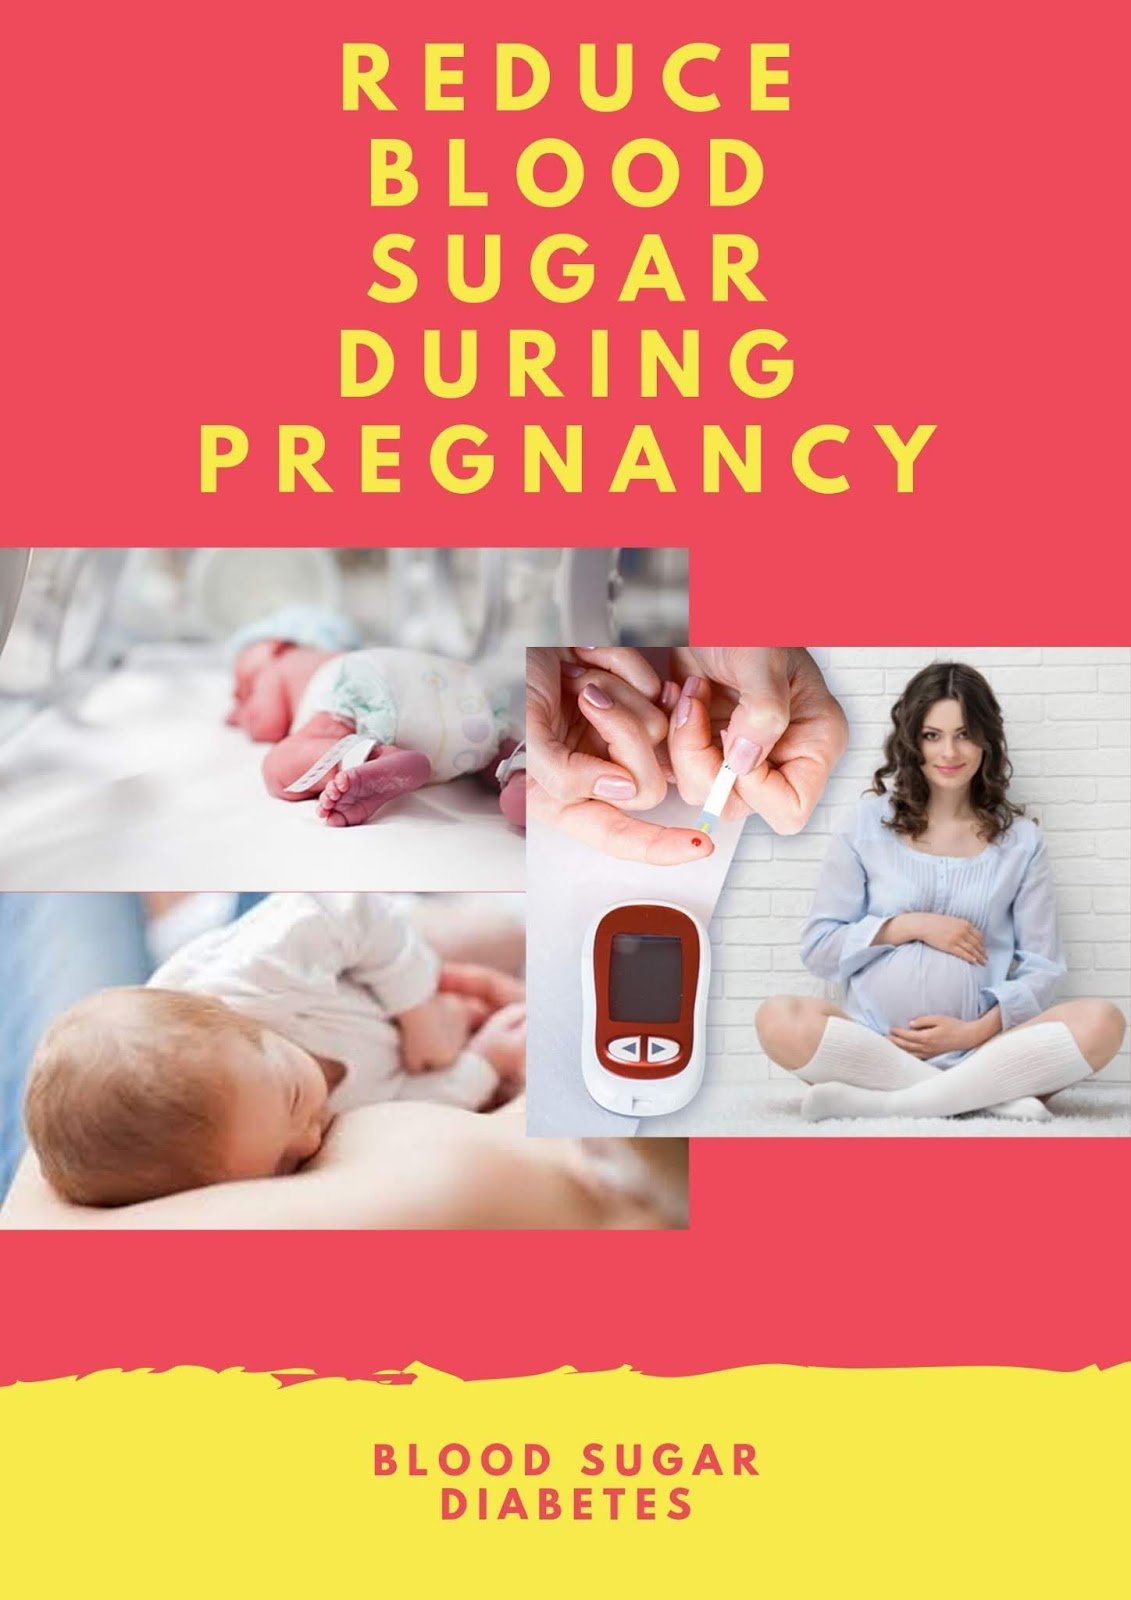 How To Control Blood Sugar Naturally: Reduce blood sugar during pregnancy